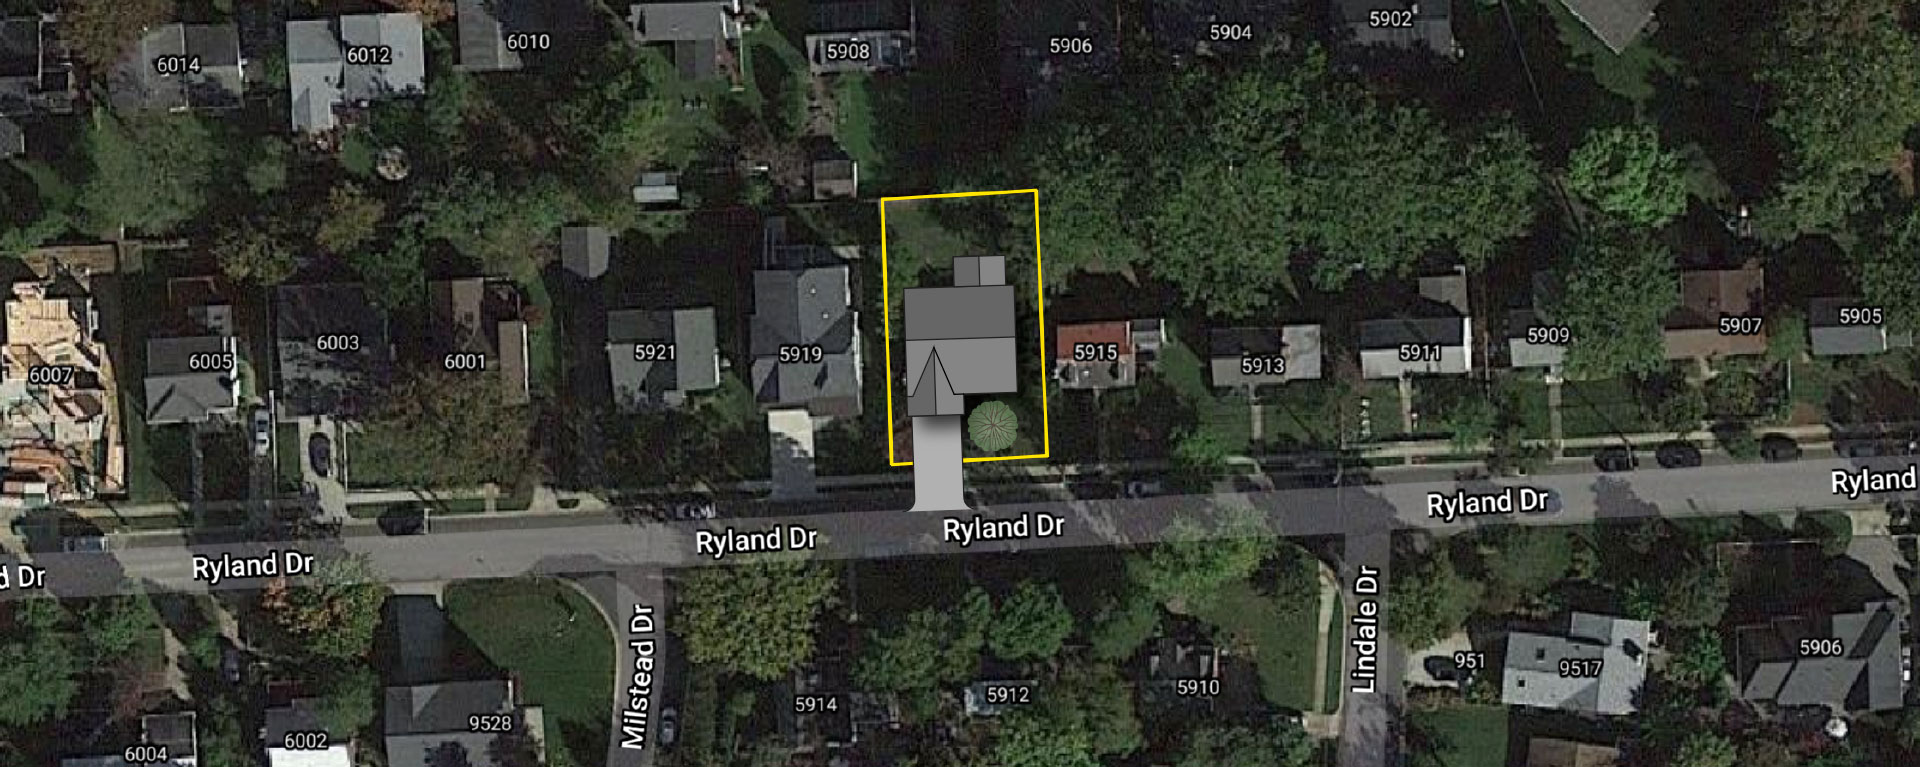 satellite image showing a site outline on Ryland dr with proposed house placement superimposed